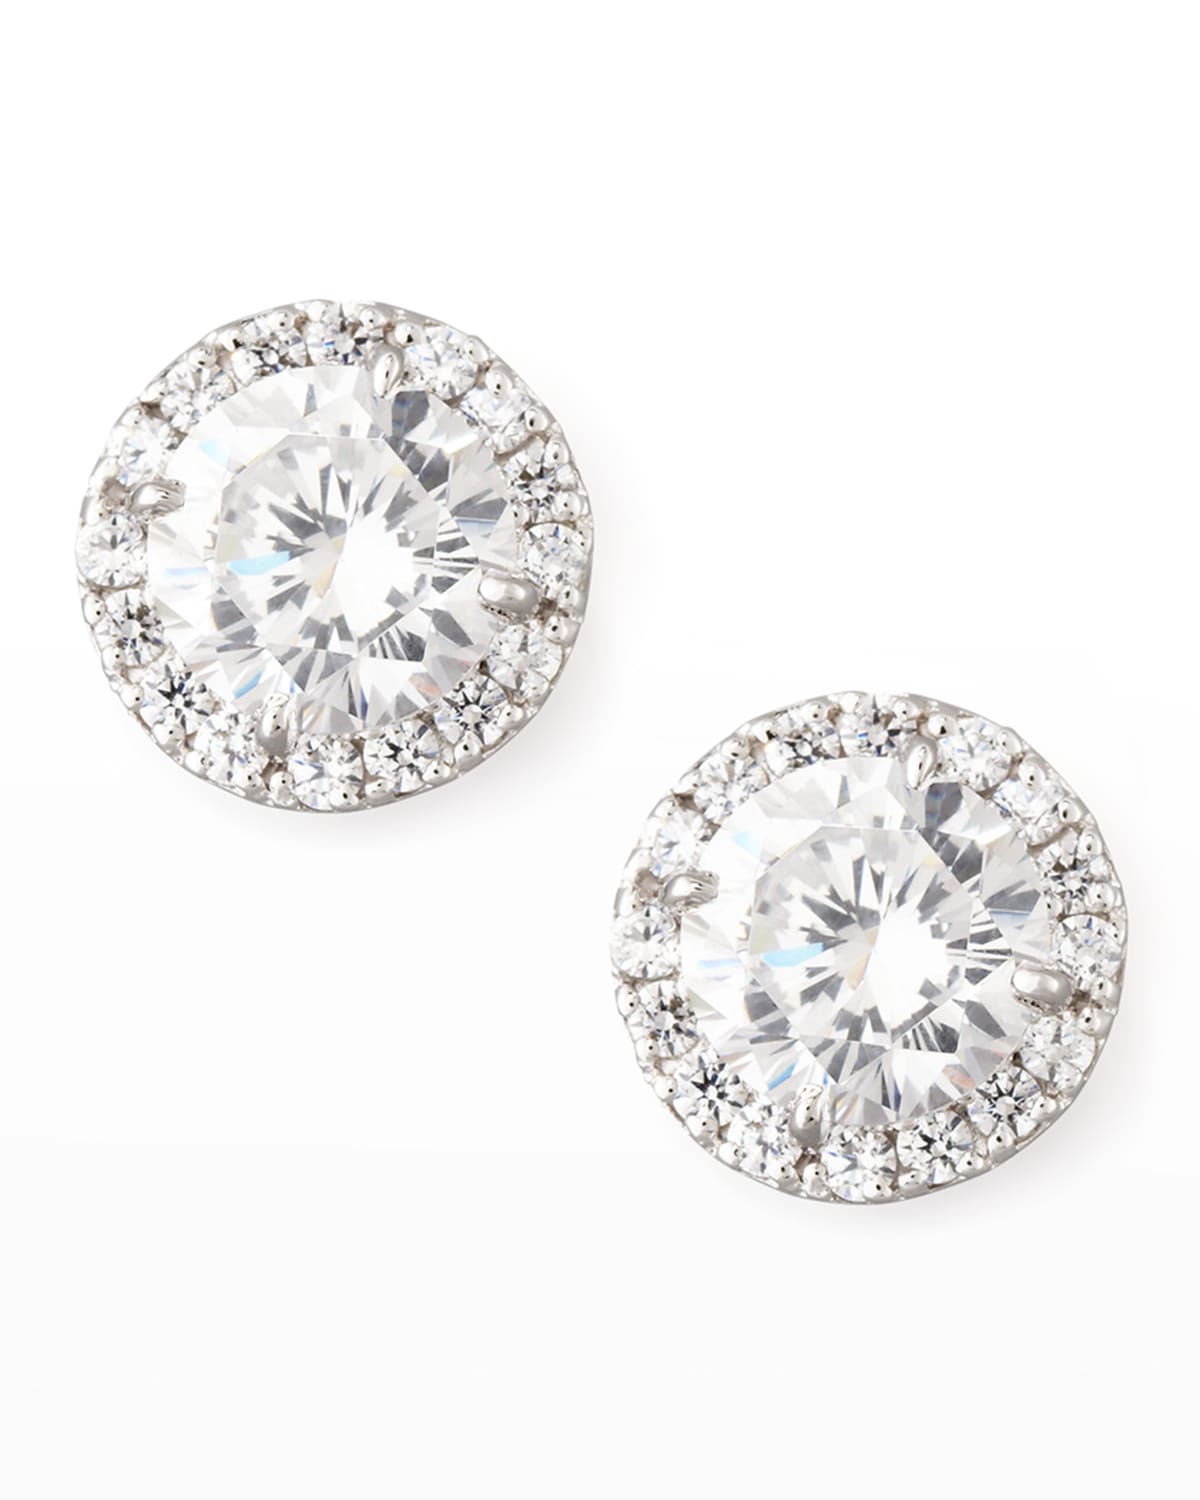 Fantasia by DeSerio Sterling Silver 1.5ct Pave Stud Earrings